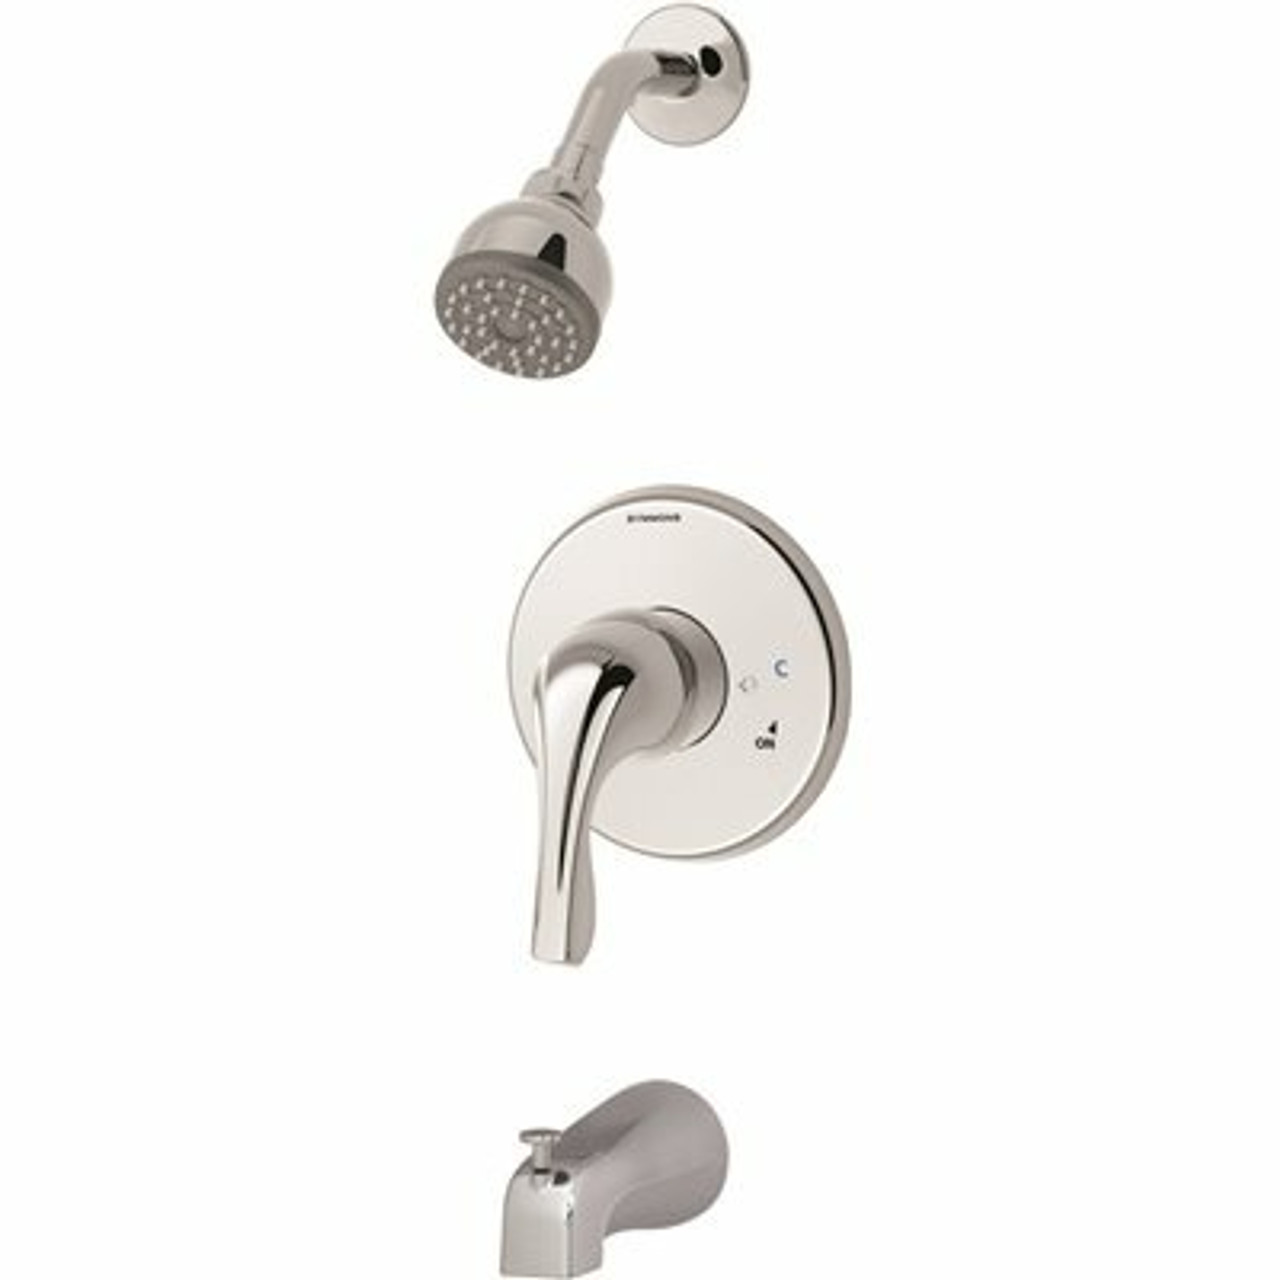 Symmons Origins Temptrol Single-Handle 1-Spray Tub And Shower Faucet In Chrome (Valve Included) - 206389230